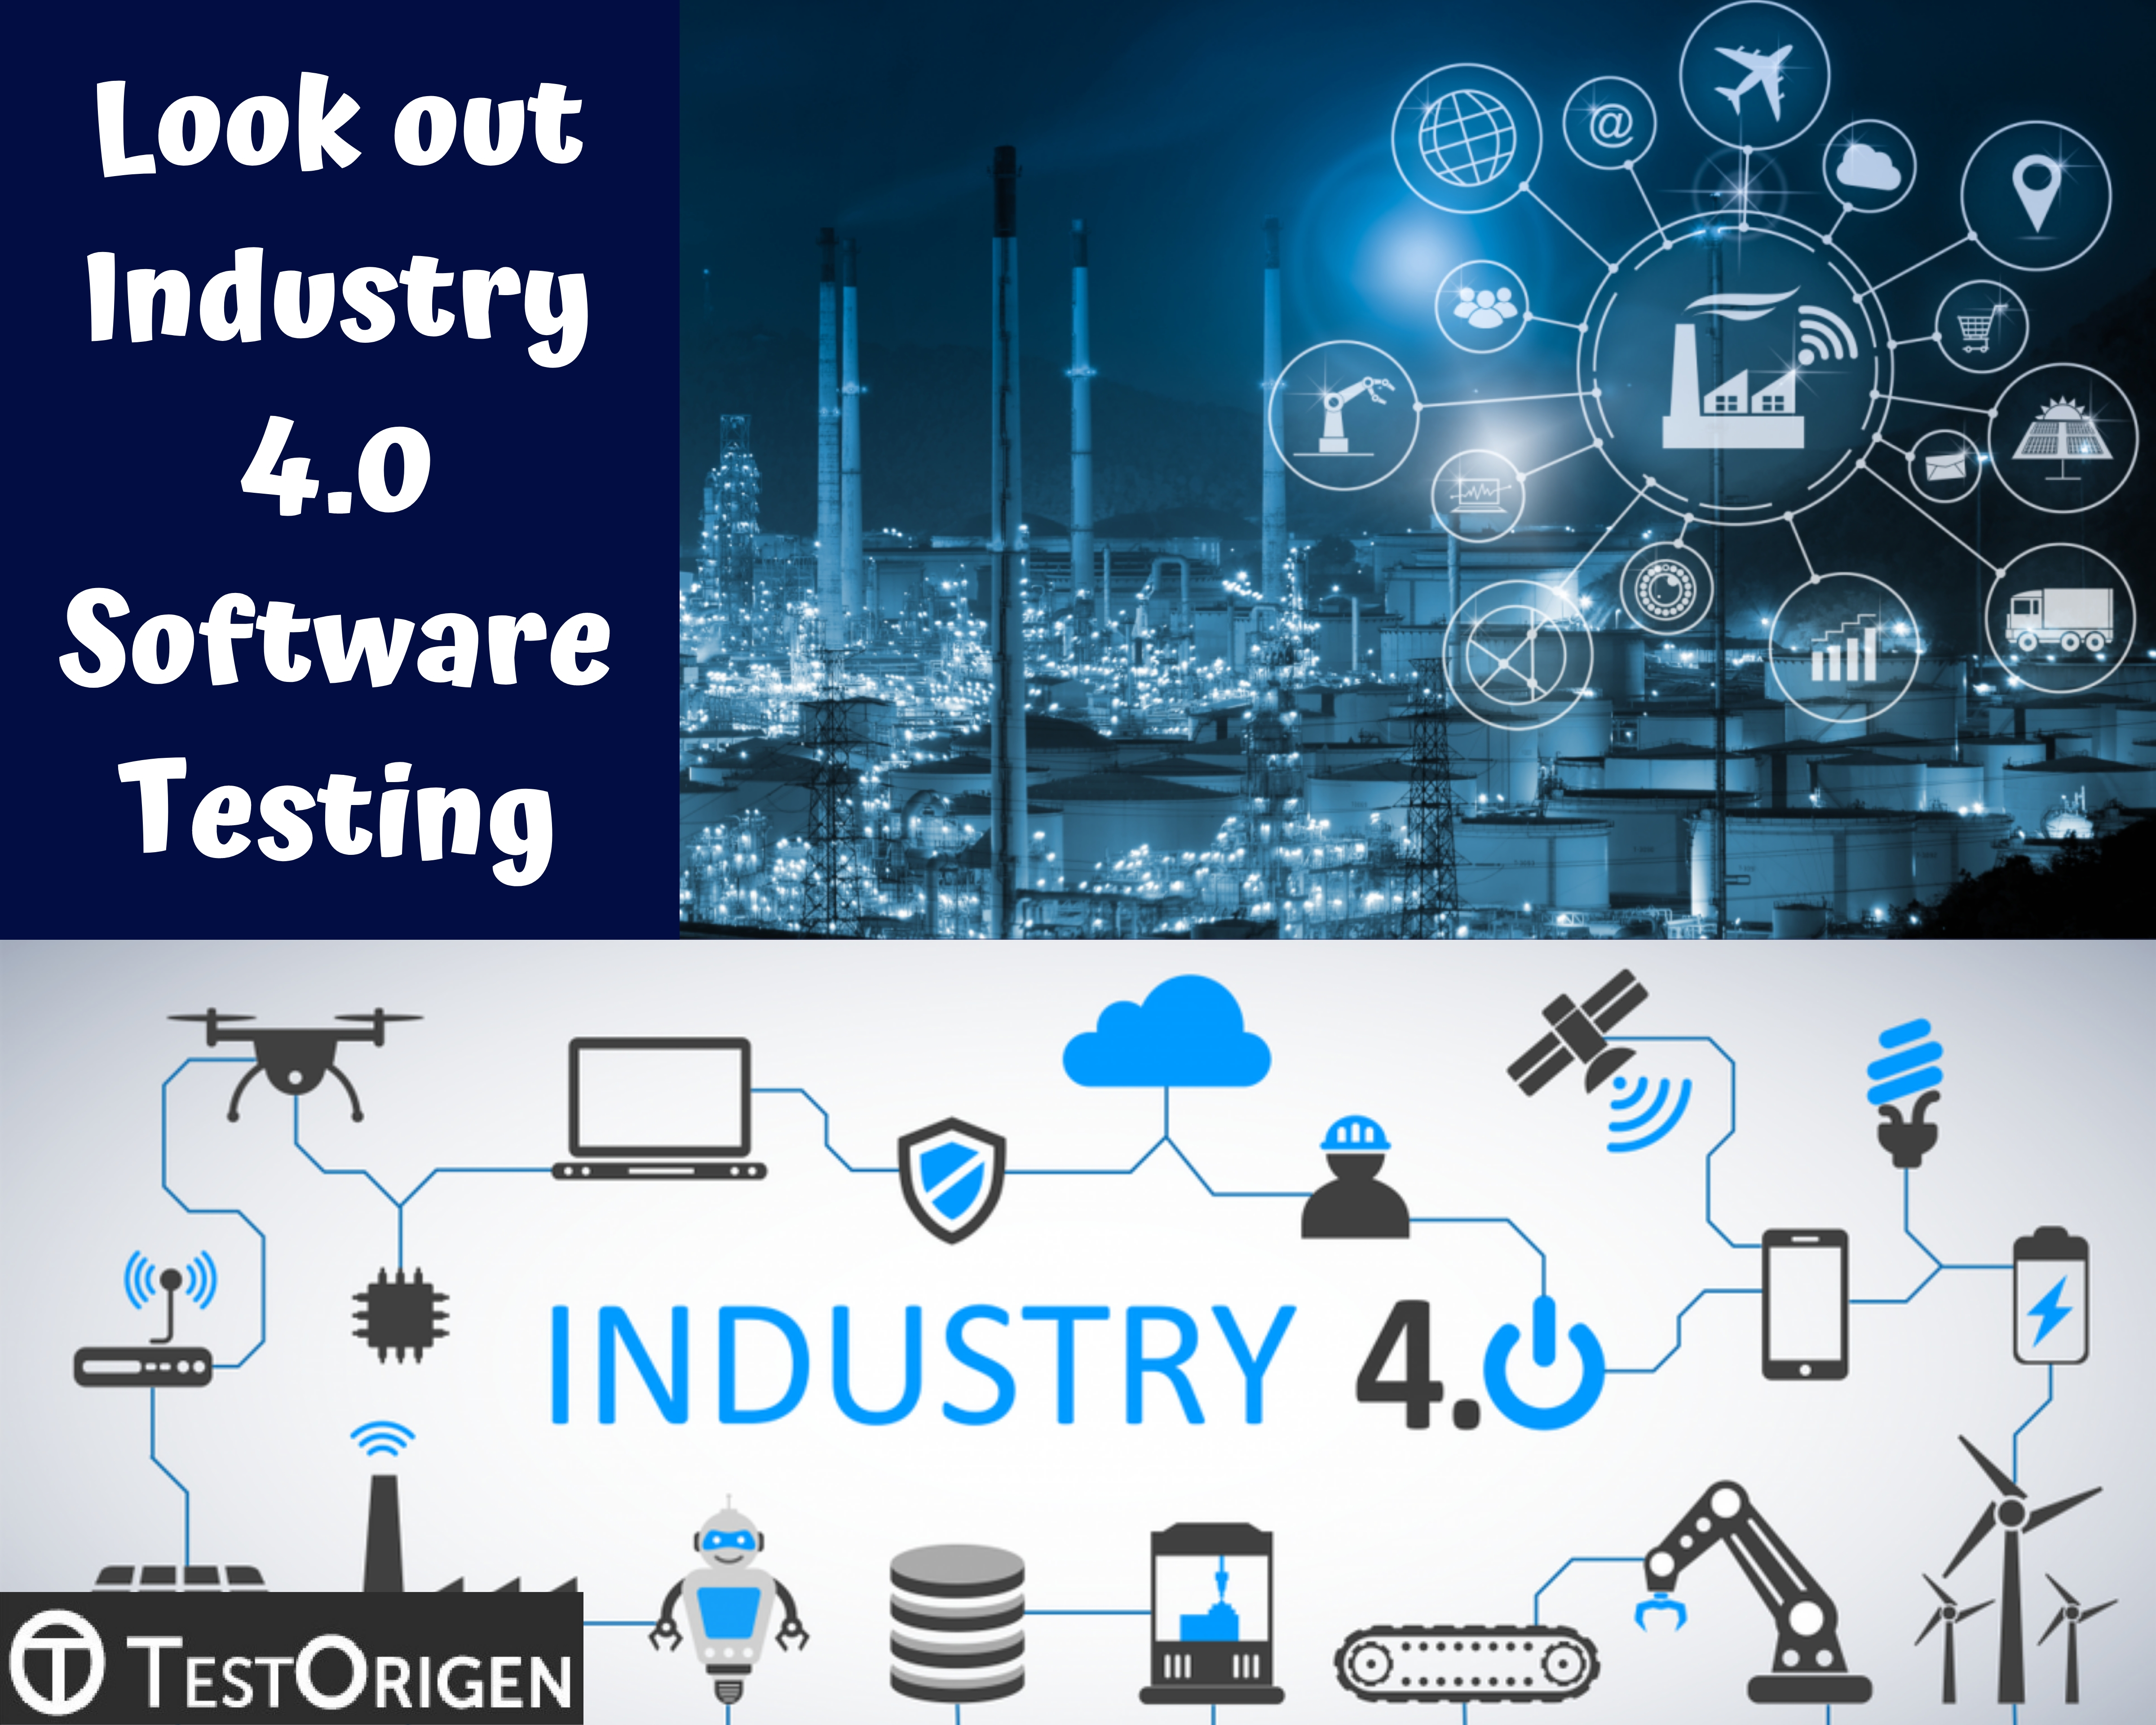 Look out Industry 4.0 Software Testing